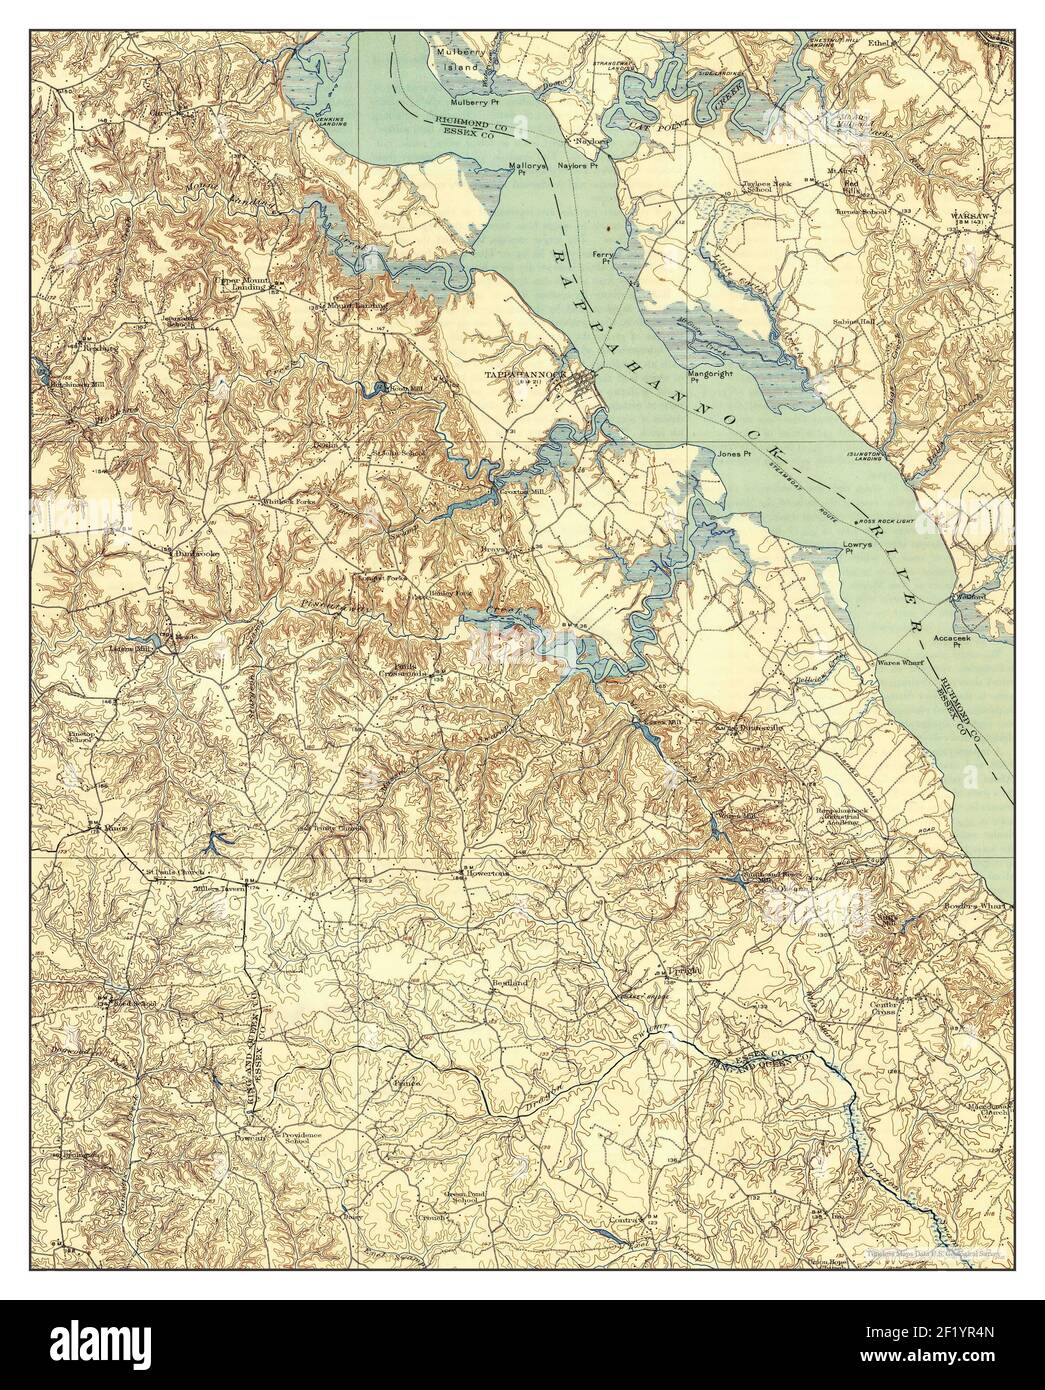 Tappahannock, Virginia, map 1918, 1:62500, United States of America by Timeless Maps, data U.S. Geological Survey Stock Photo